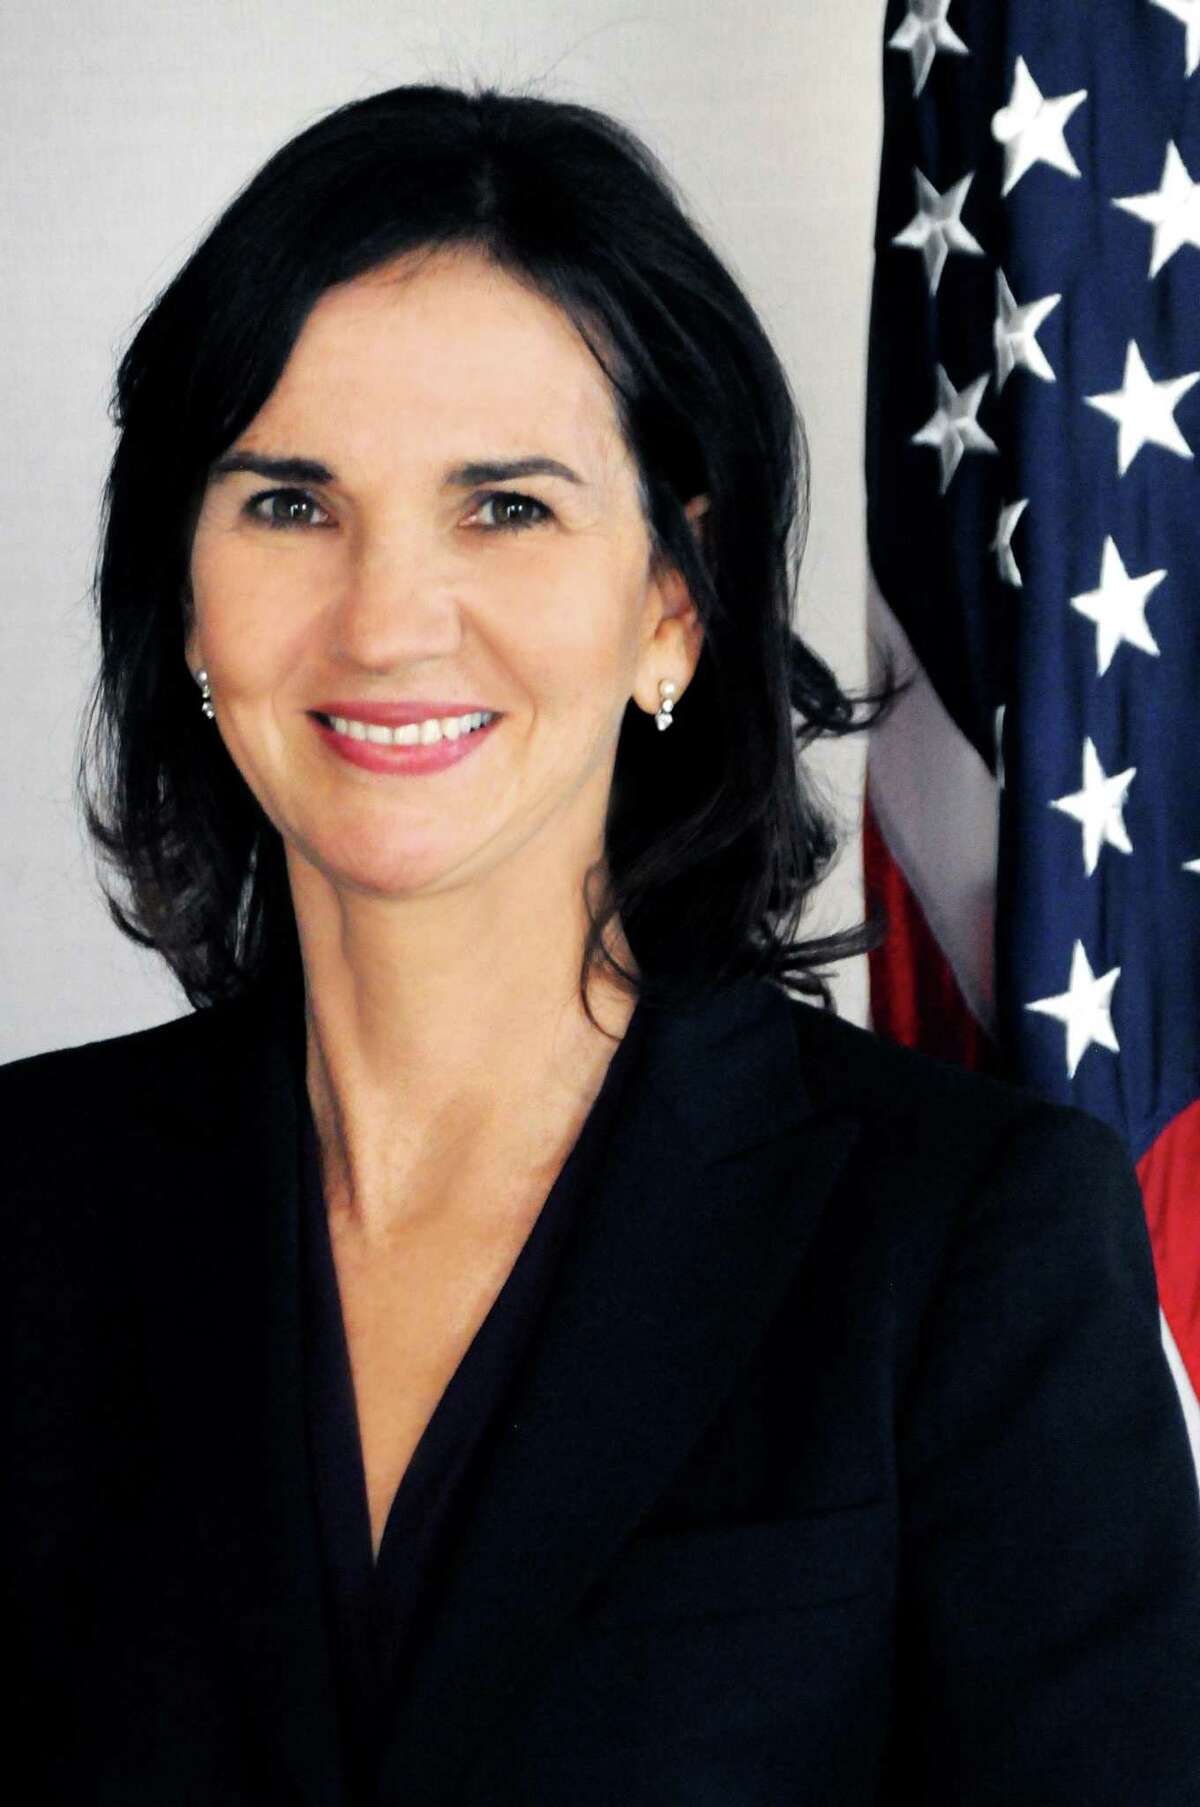 Former Connecticut U.S. Attorney Deirdre M. Daly will participate in a forum on the ongoing investigation into Russian interference in the 2016 Presidential Election. The event will take place tonight at 6:30 in St. Joseph University’s Mercy Hall, West Hartford.